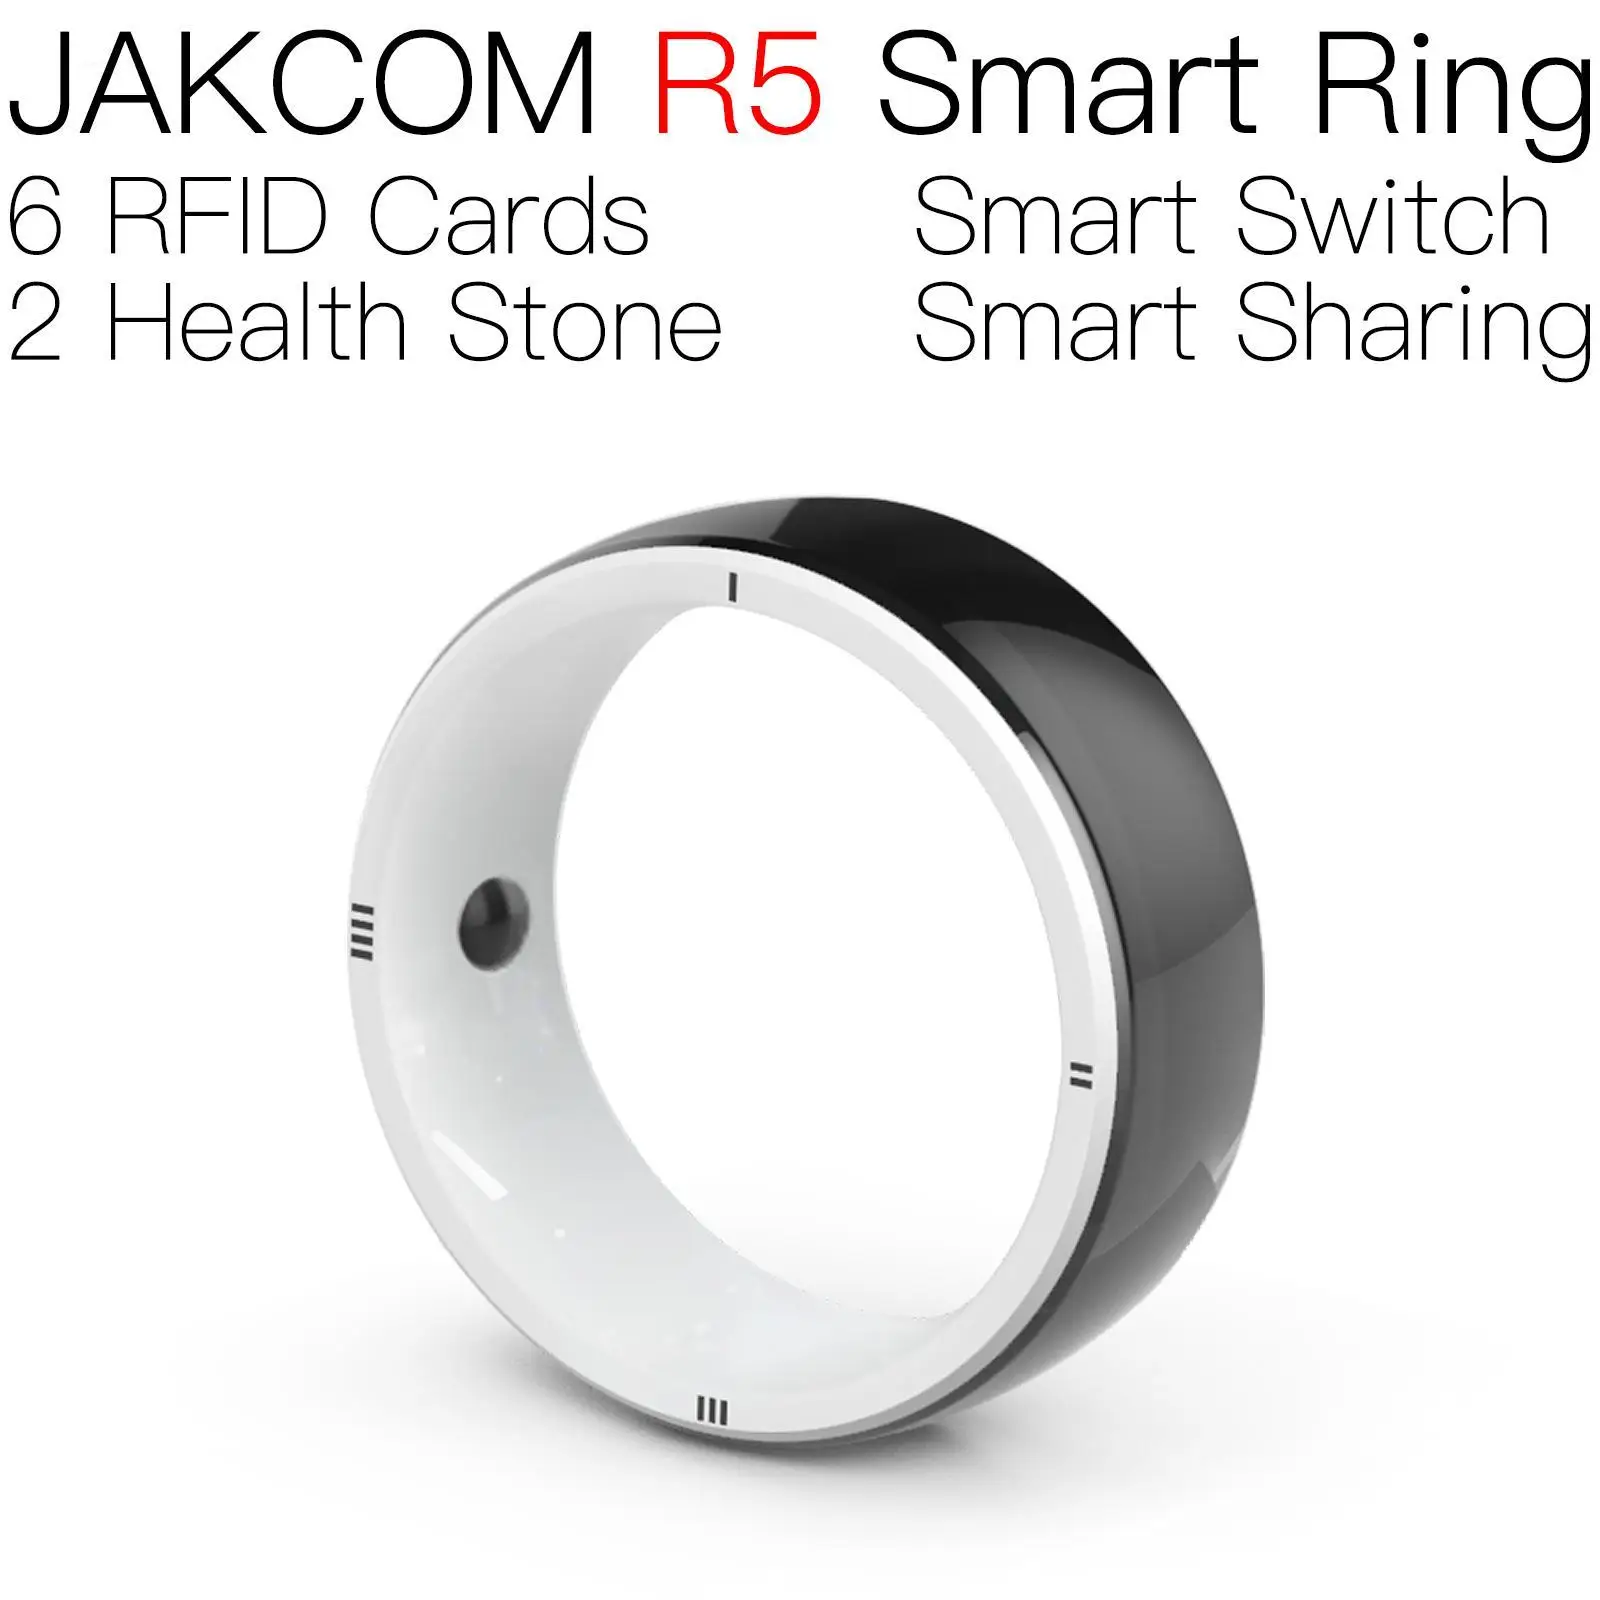 

JAKCOM R5 Smart Ring Match to name card mct nfc 7 bytes unfused j2a040 chip java jcop cards hotel rfid tags 125khz rewritable